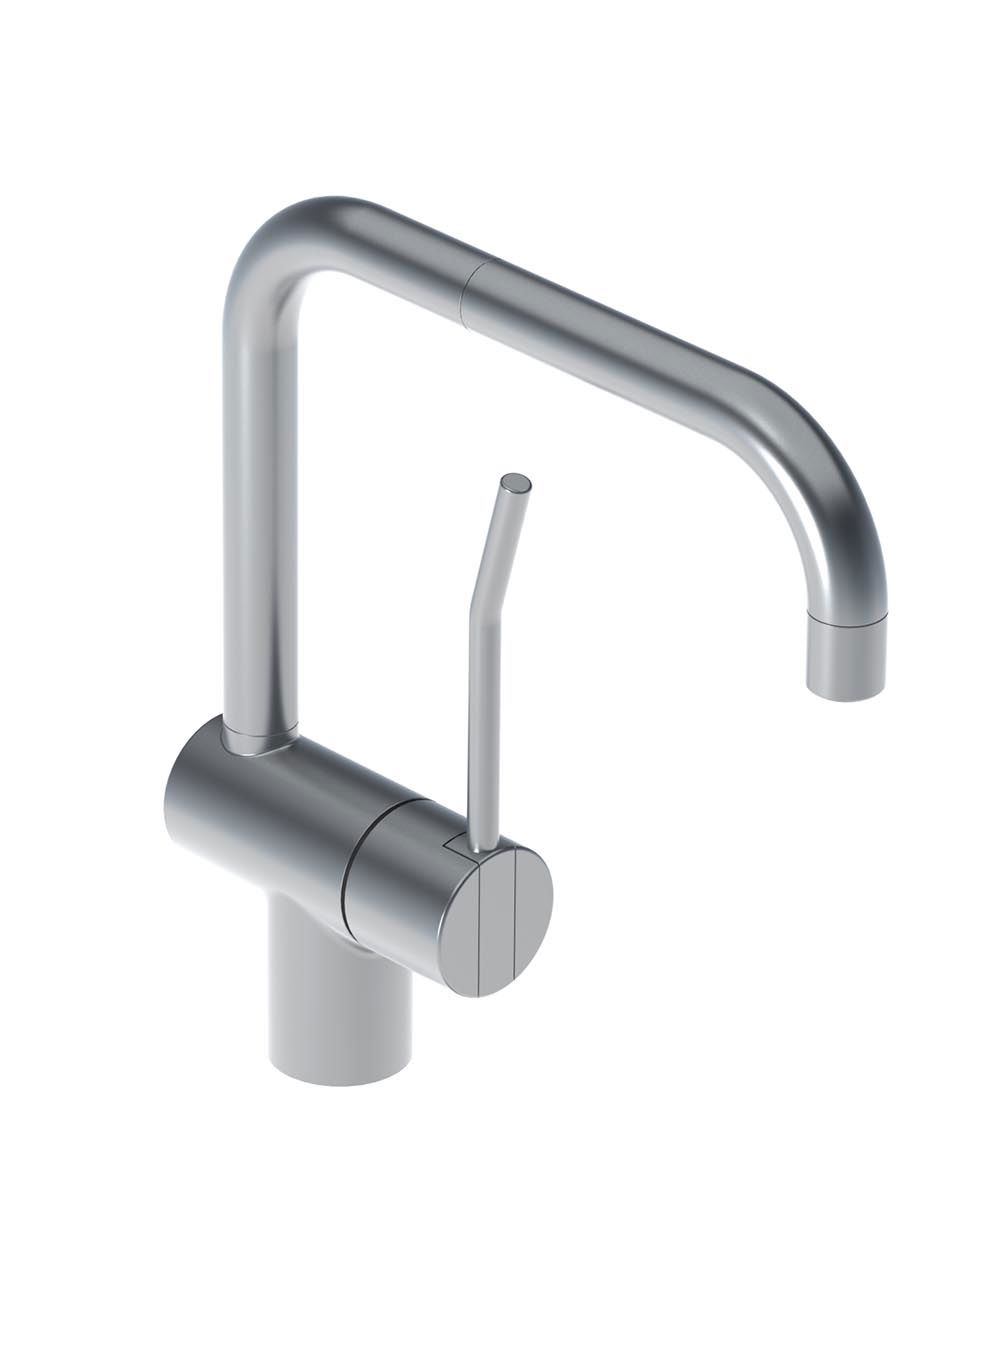 KV1L: One-handle mixer with ceramic disc technology, long lever and double swivel spout and water saving a